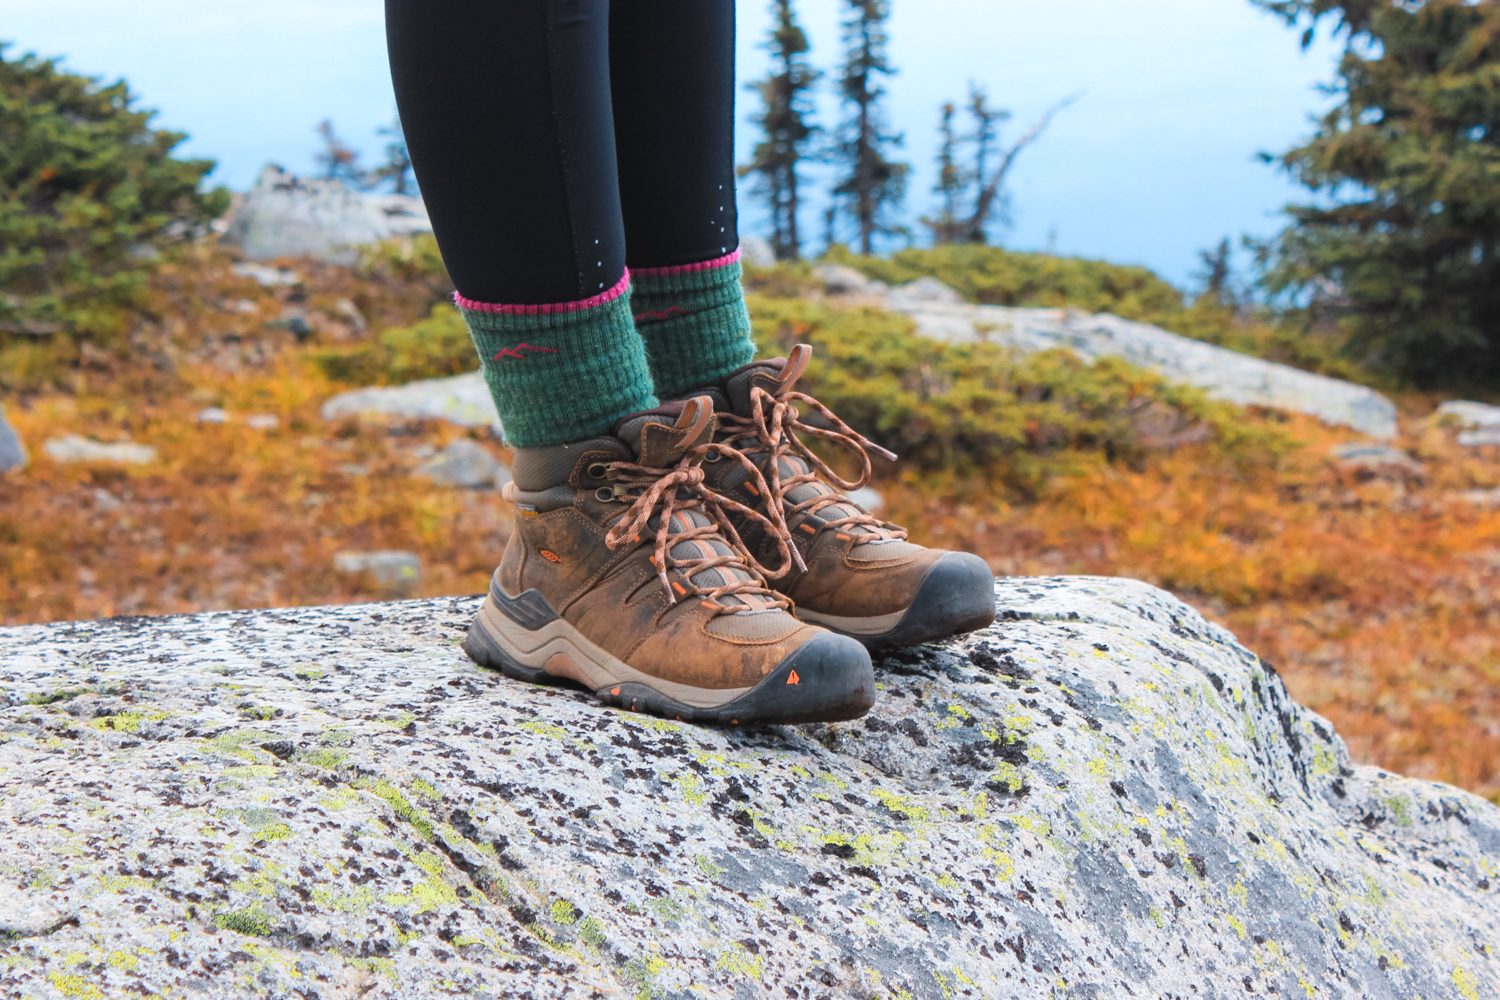 Closeup of hiking boots. Women standing on a rock.